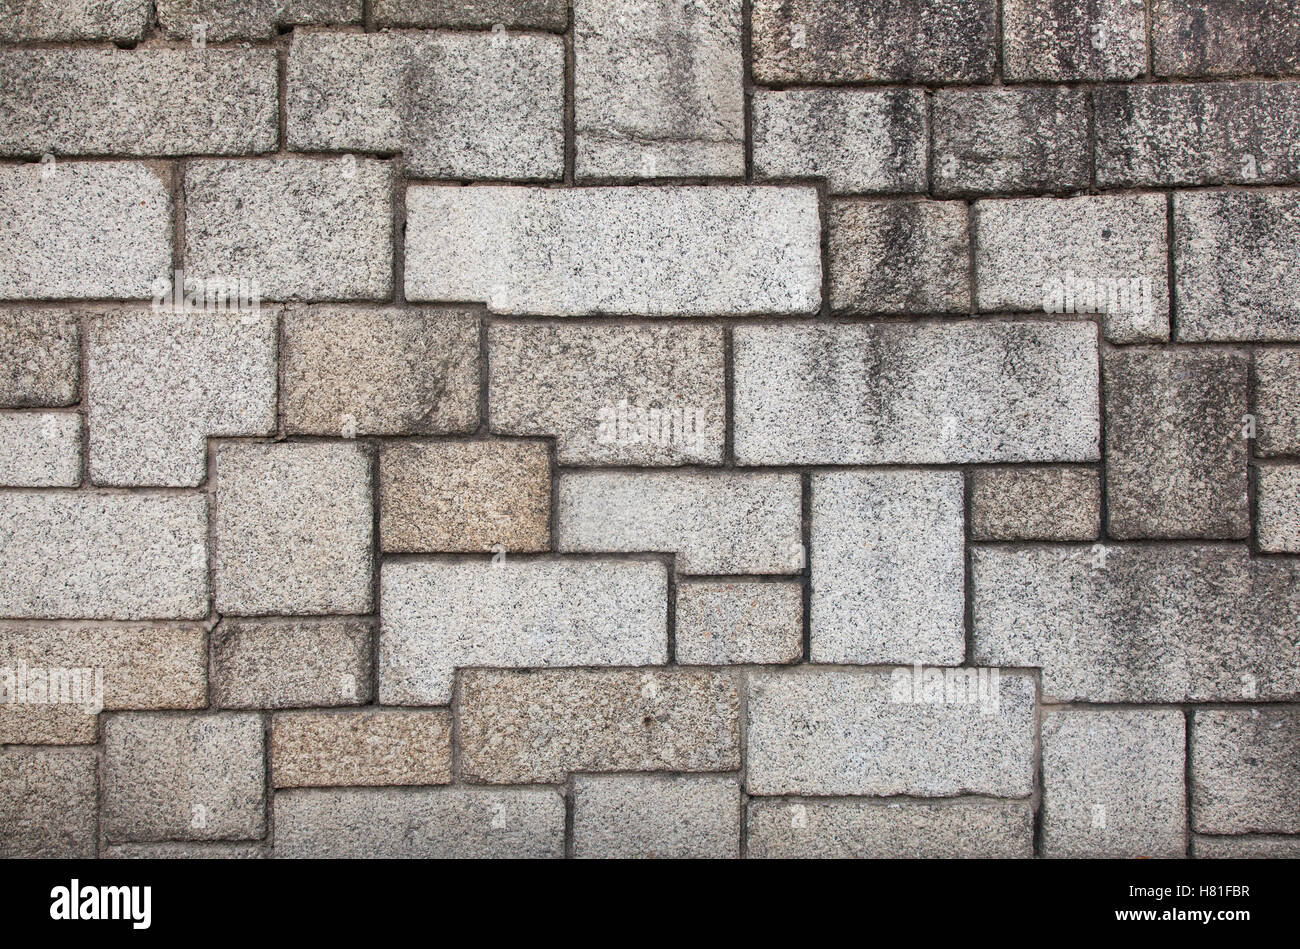 Rustic stones wall background. Stock Photo